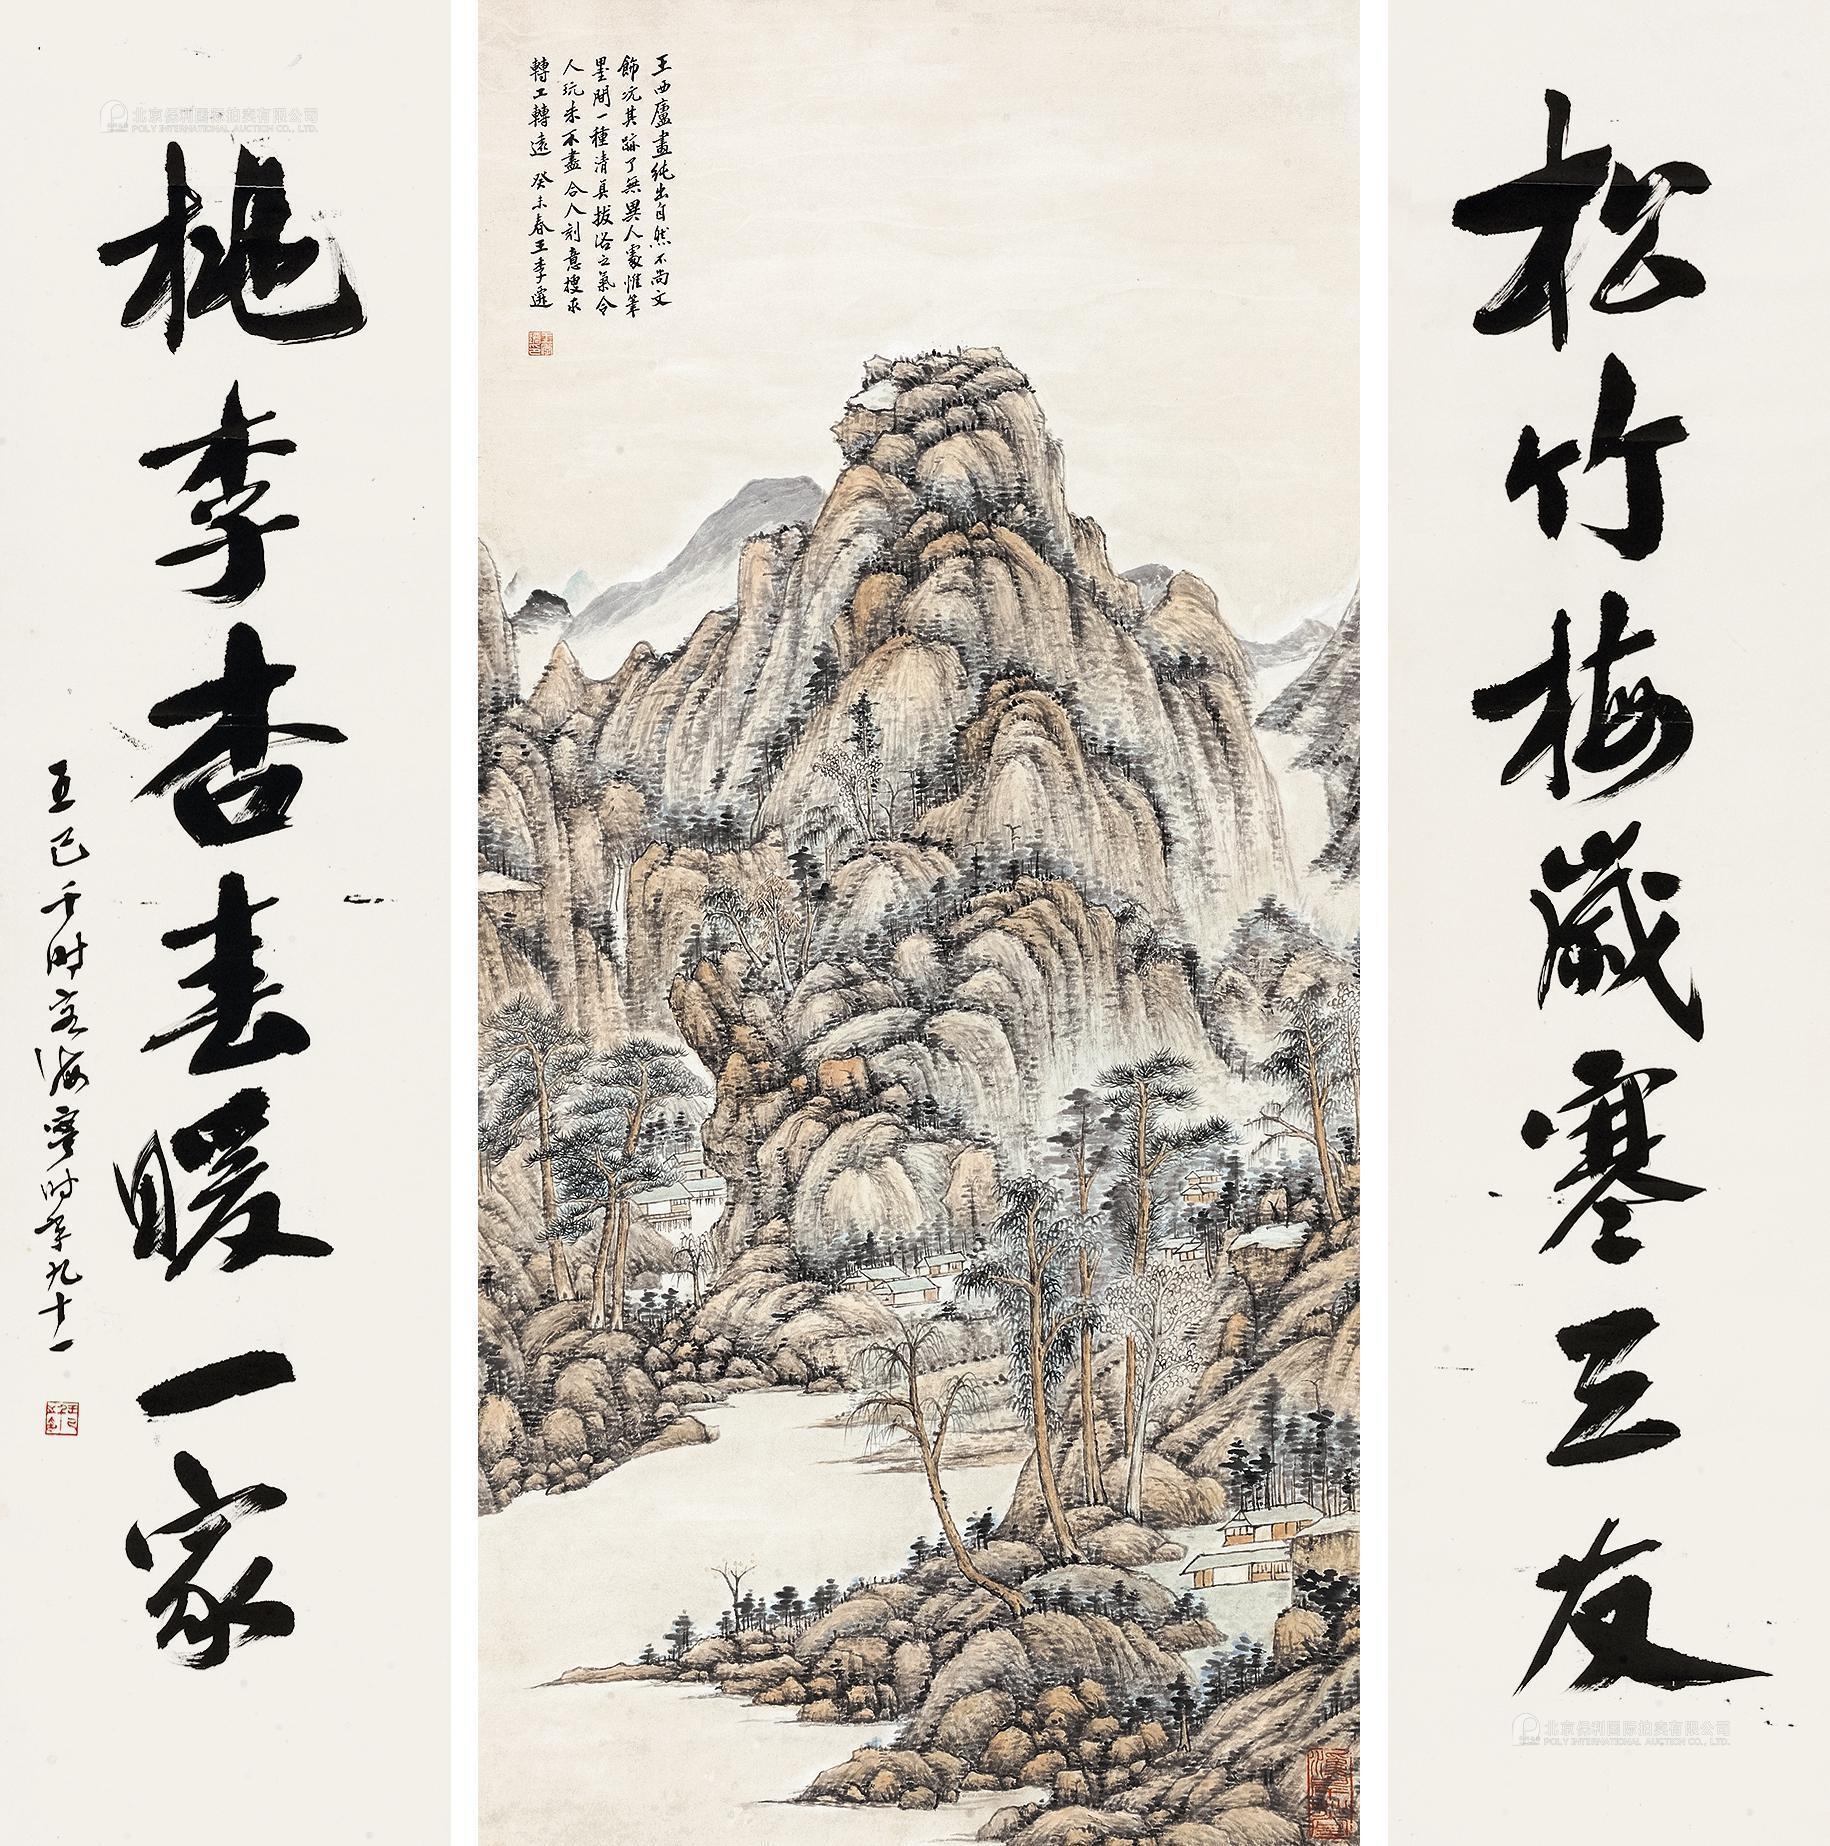 2 Works: Calligraphy, Landscape by Wang Jiqian, 2003